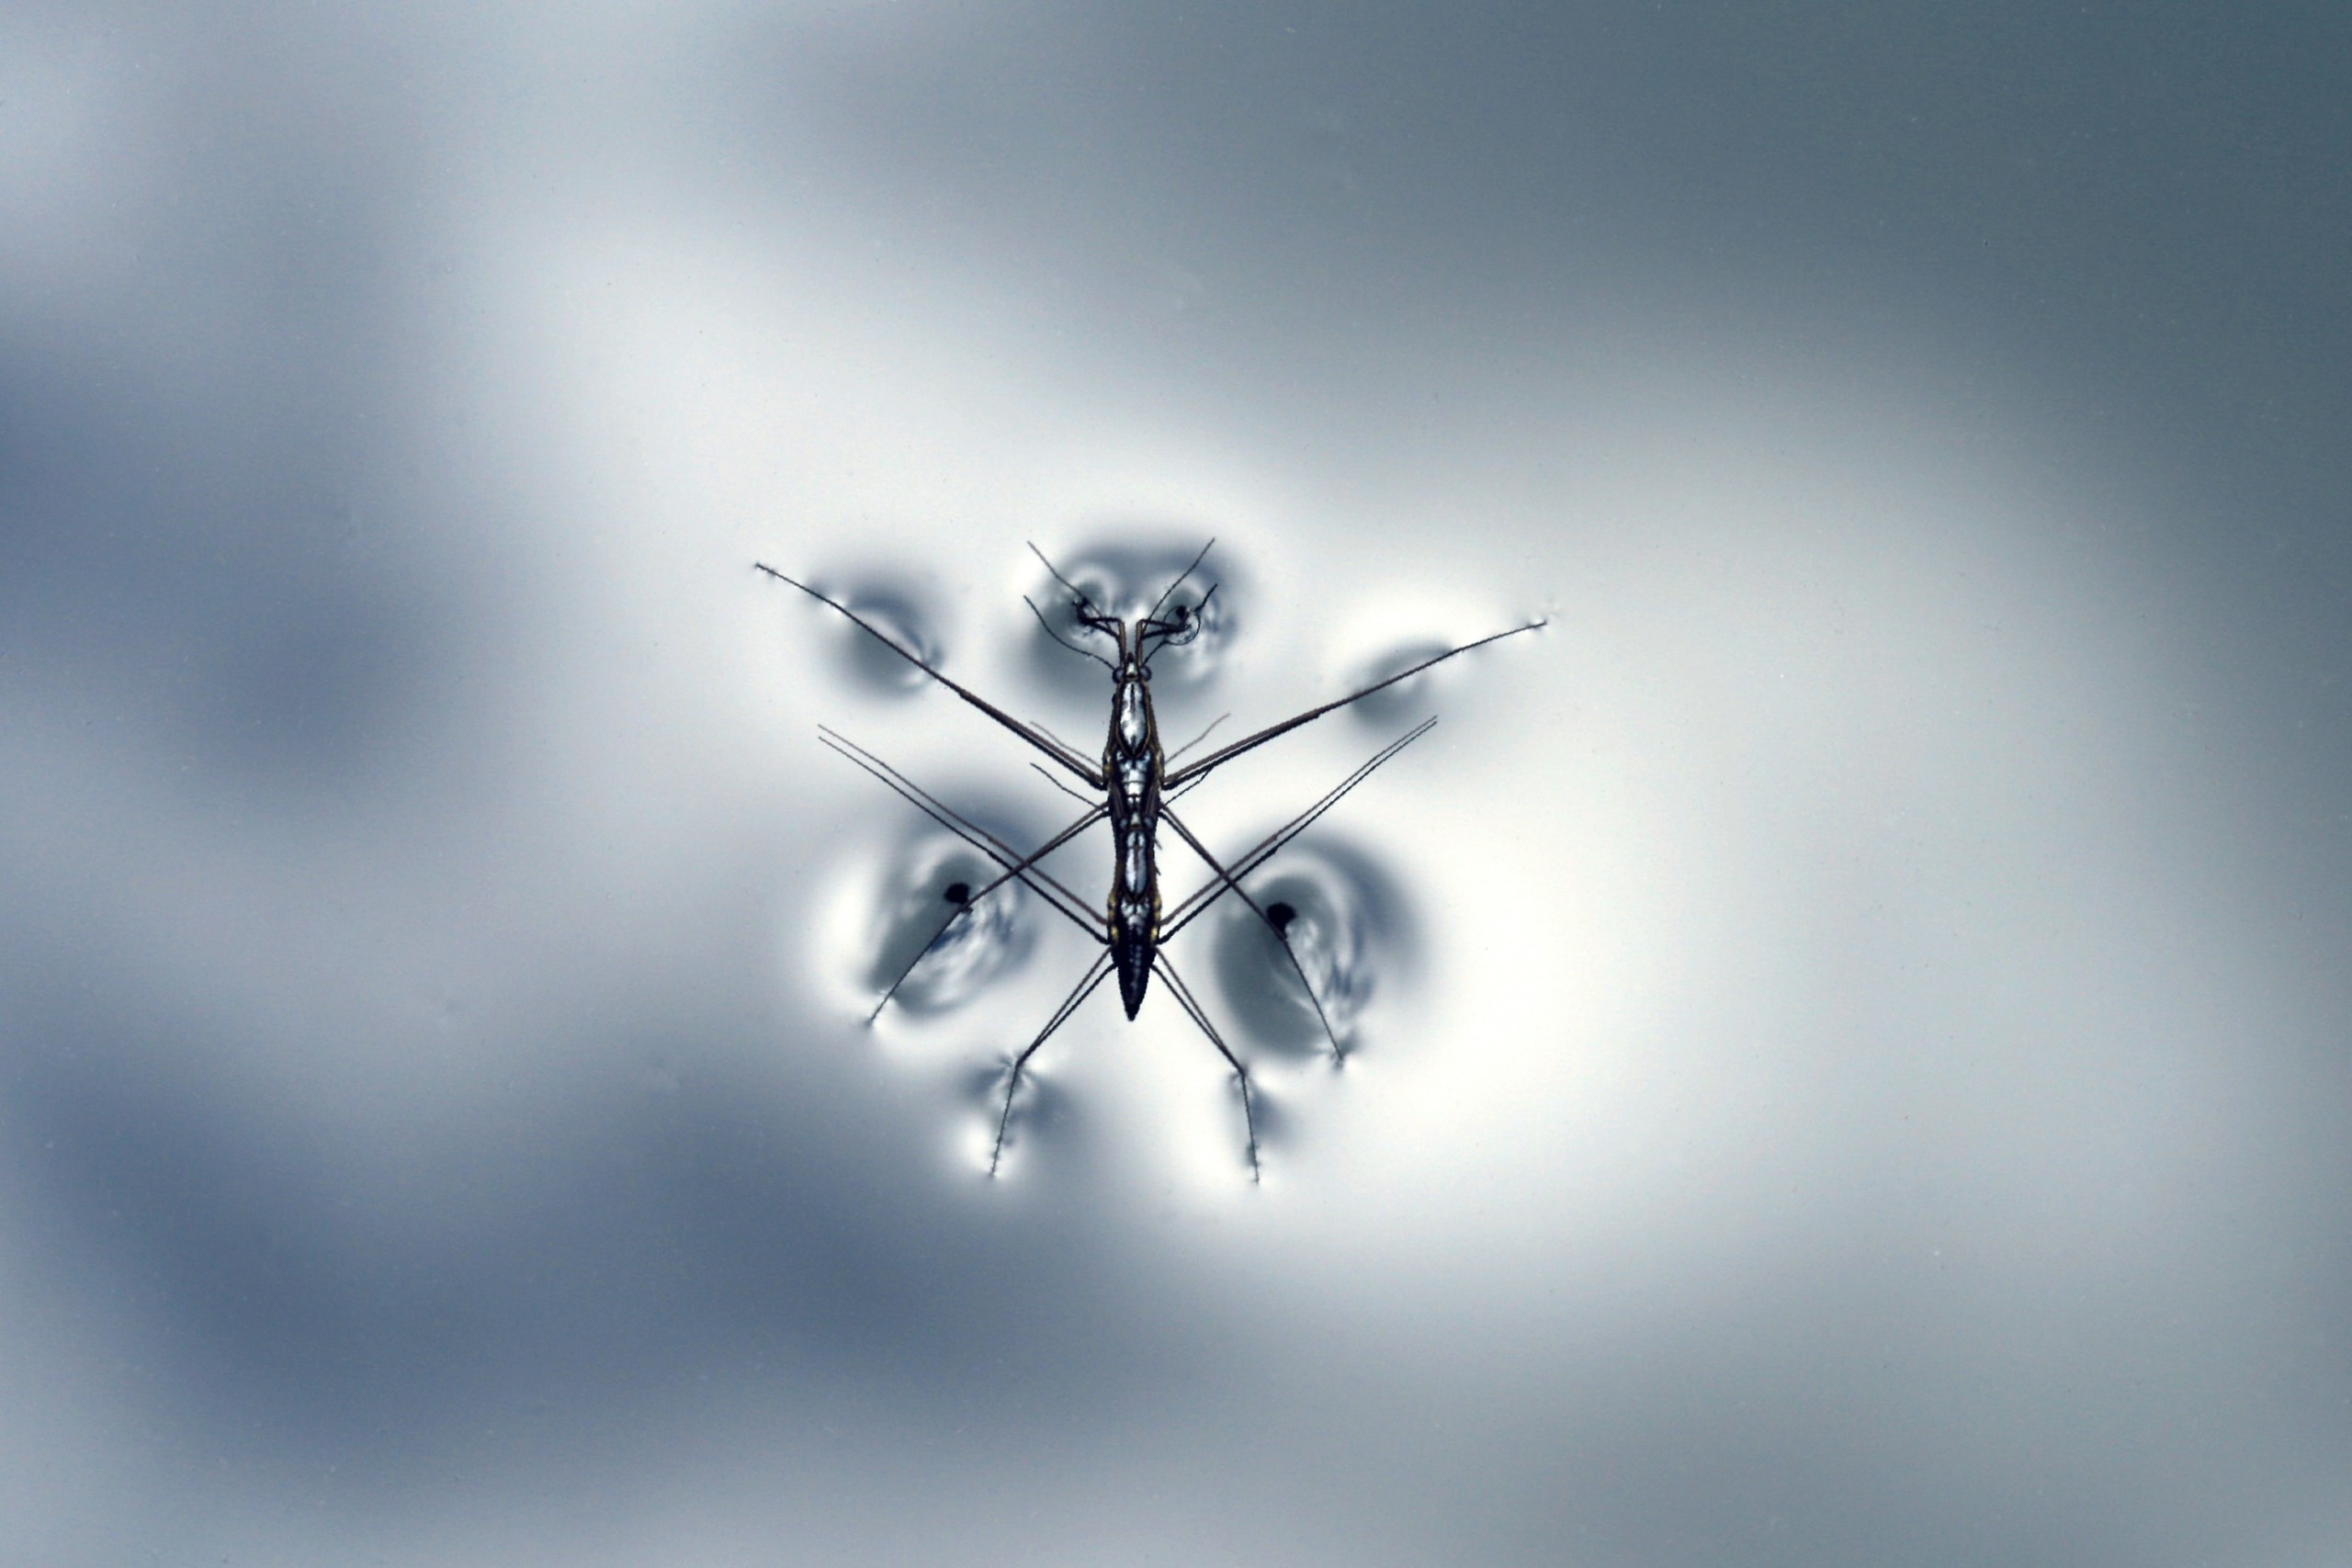 Fig. 1 (Click to enlarge). Small creatures like this water strider rely on surface tension to keep them atop the water. Photo by Tanguy Sauvin.